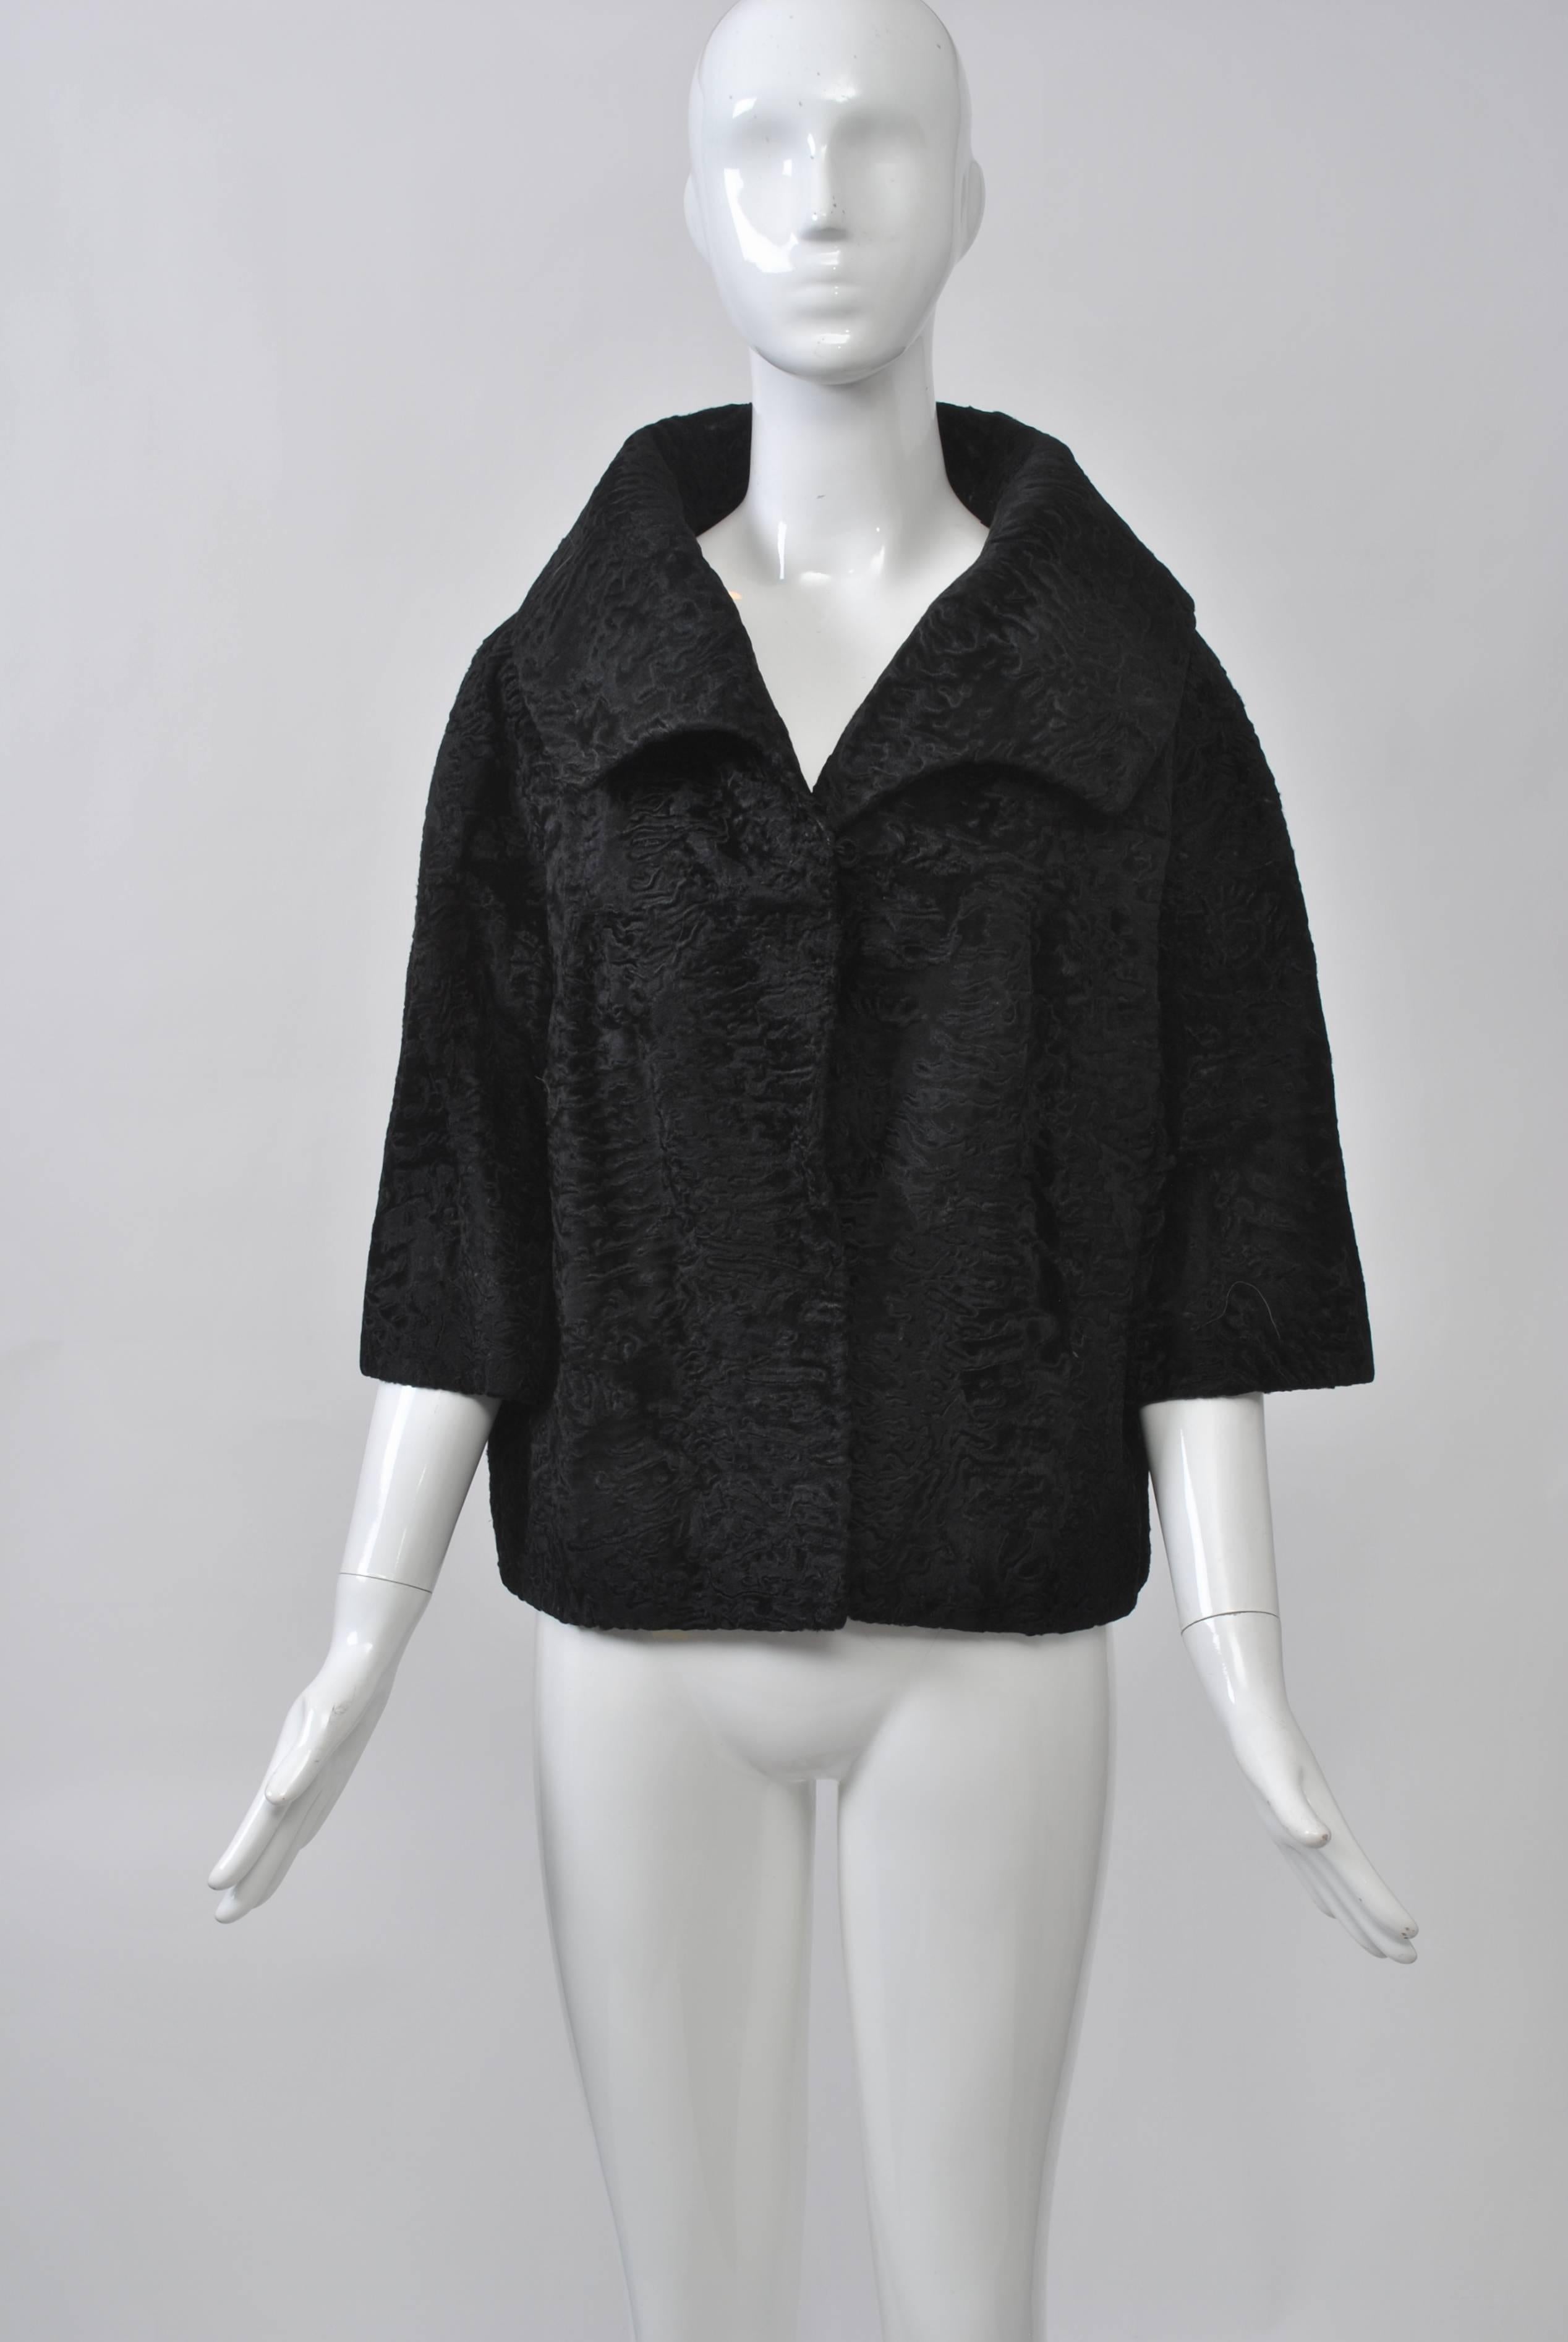 Classic 1960s black broadtail jacket featuring a stand-up, spread collar and three-quarter length sleeves. Closes with two fur hooks. Beautiful lining and tape to attach a fur collar, the ones usually found on the cashmere cardigans of the period.